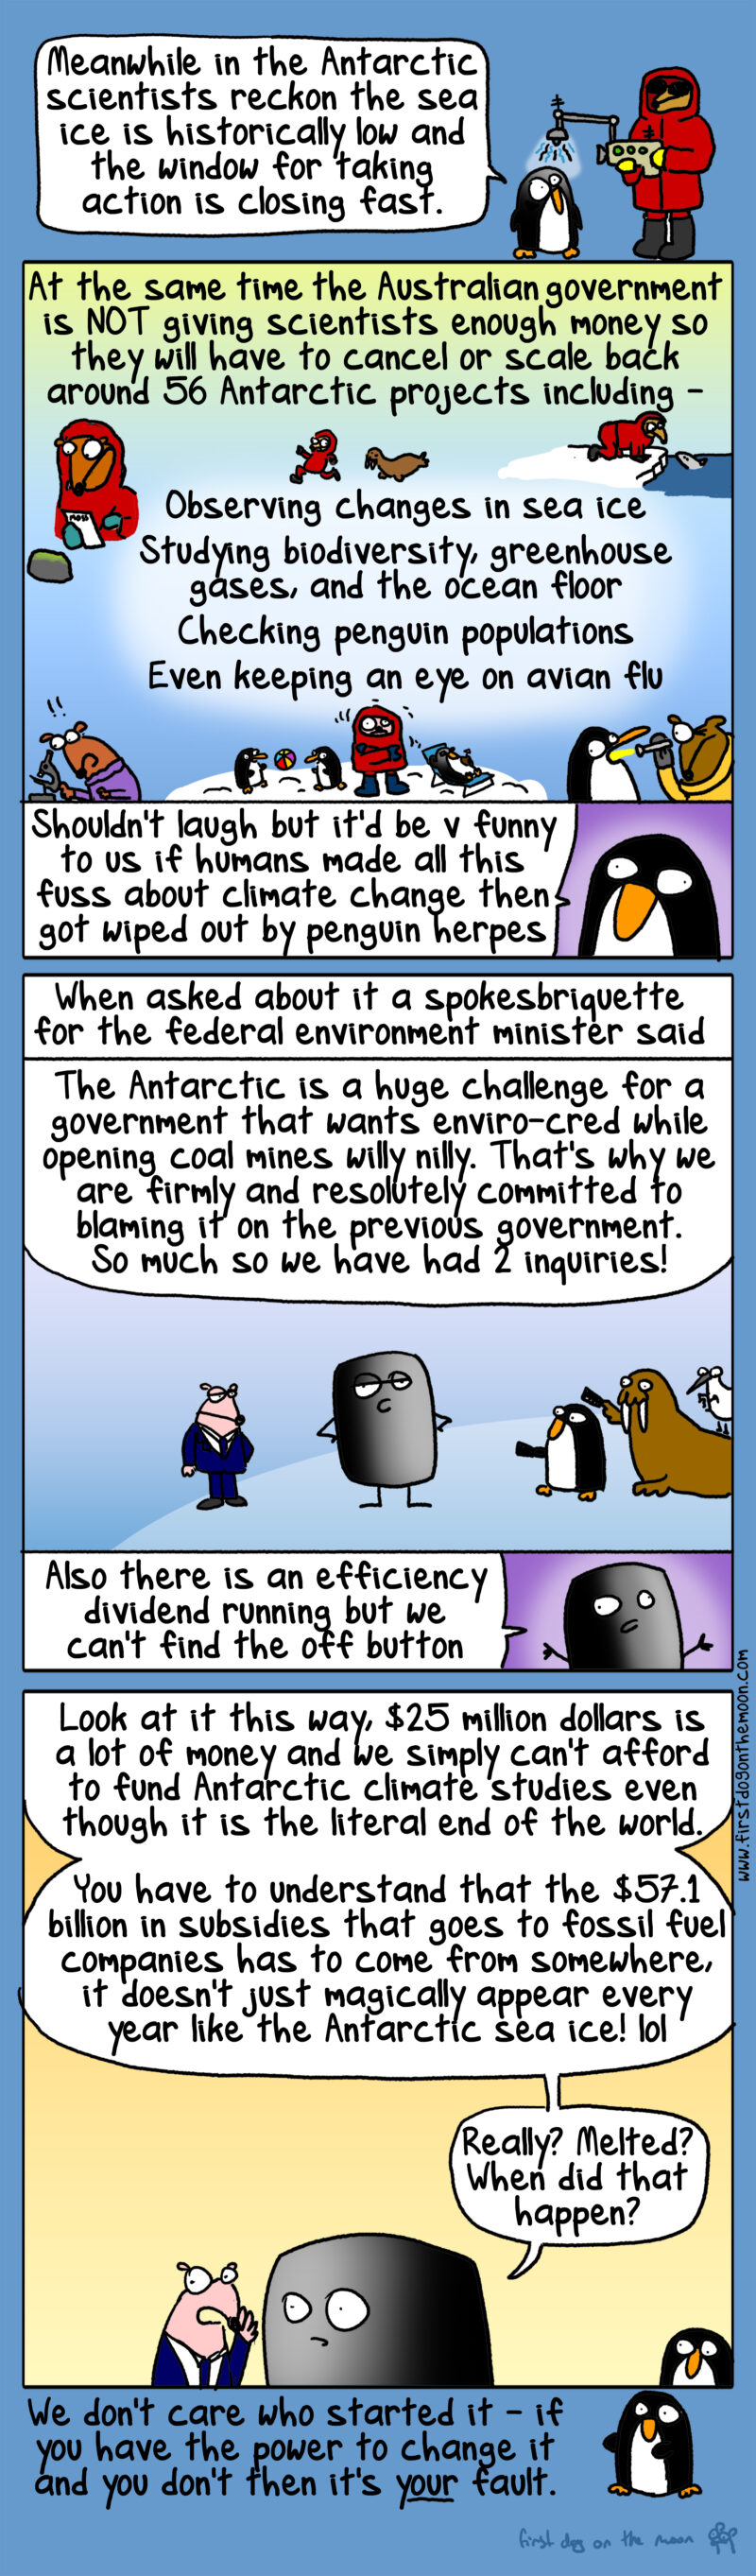 Sea ice is at historic lows meanwhile Australia wants to cut scientific research in Antarctica?